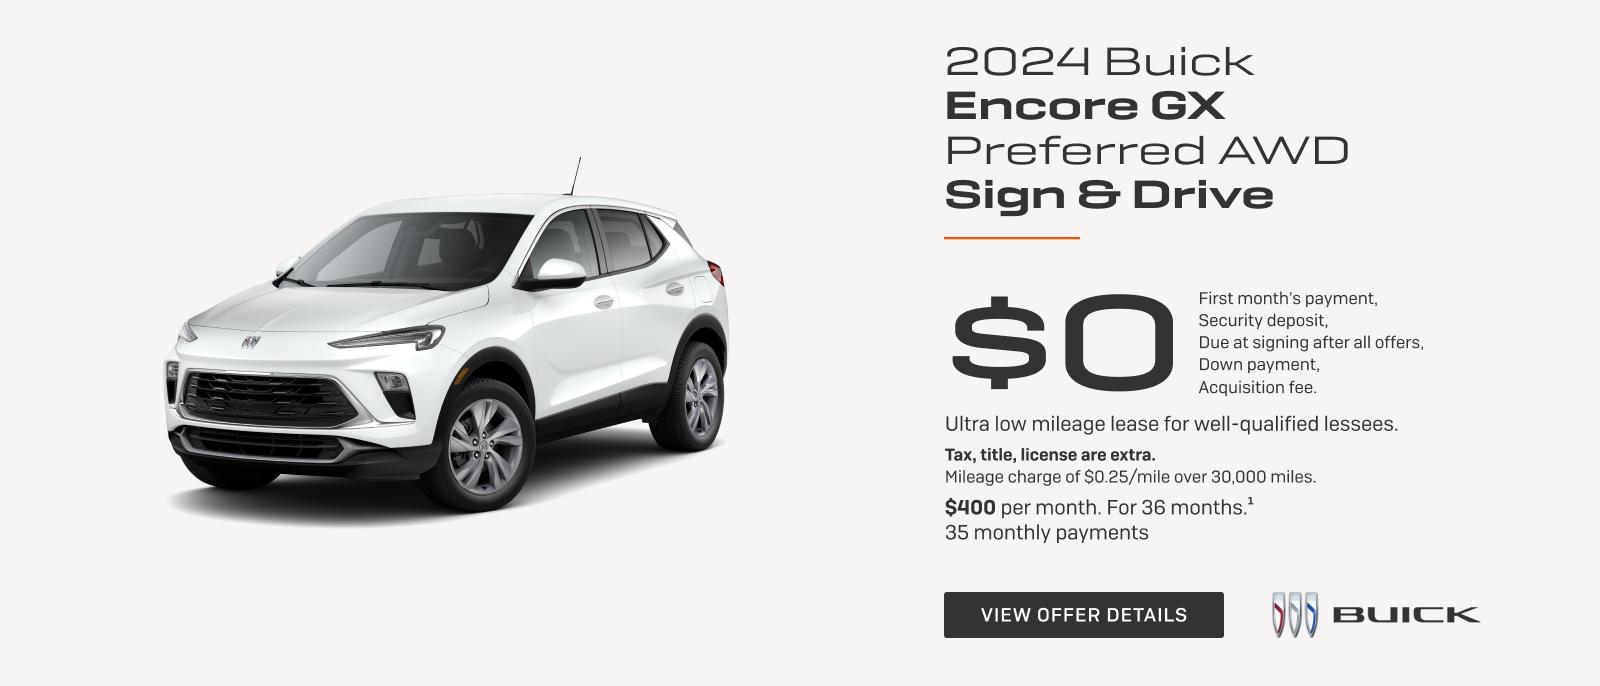 SIGN & DRIVE

$0
FIRST MONTH'S PAYMENT
SECURITY DEPOSIT
DUE AT LEASE SIGNING AFTER ALL OFFERS
DOWN PAYMENT
ACQUISITION FEE

Ultra low mileage lease for well-qualified lessees.

Tax, title, license are extra. Mileage charge of $0.25/mile over 32,500 miles.

$343 per month. For 39 months.1
38 monthly payments